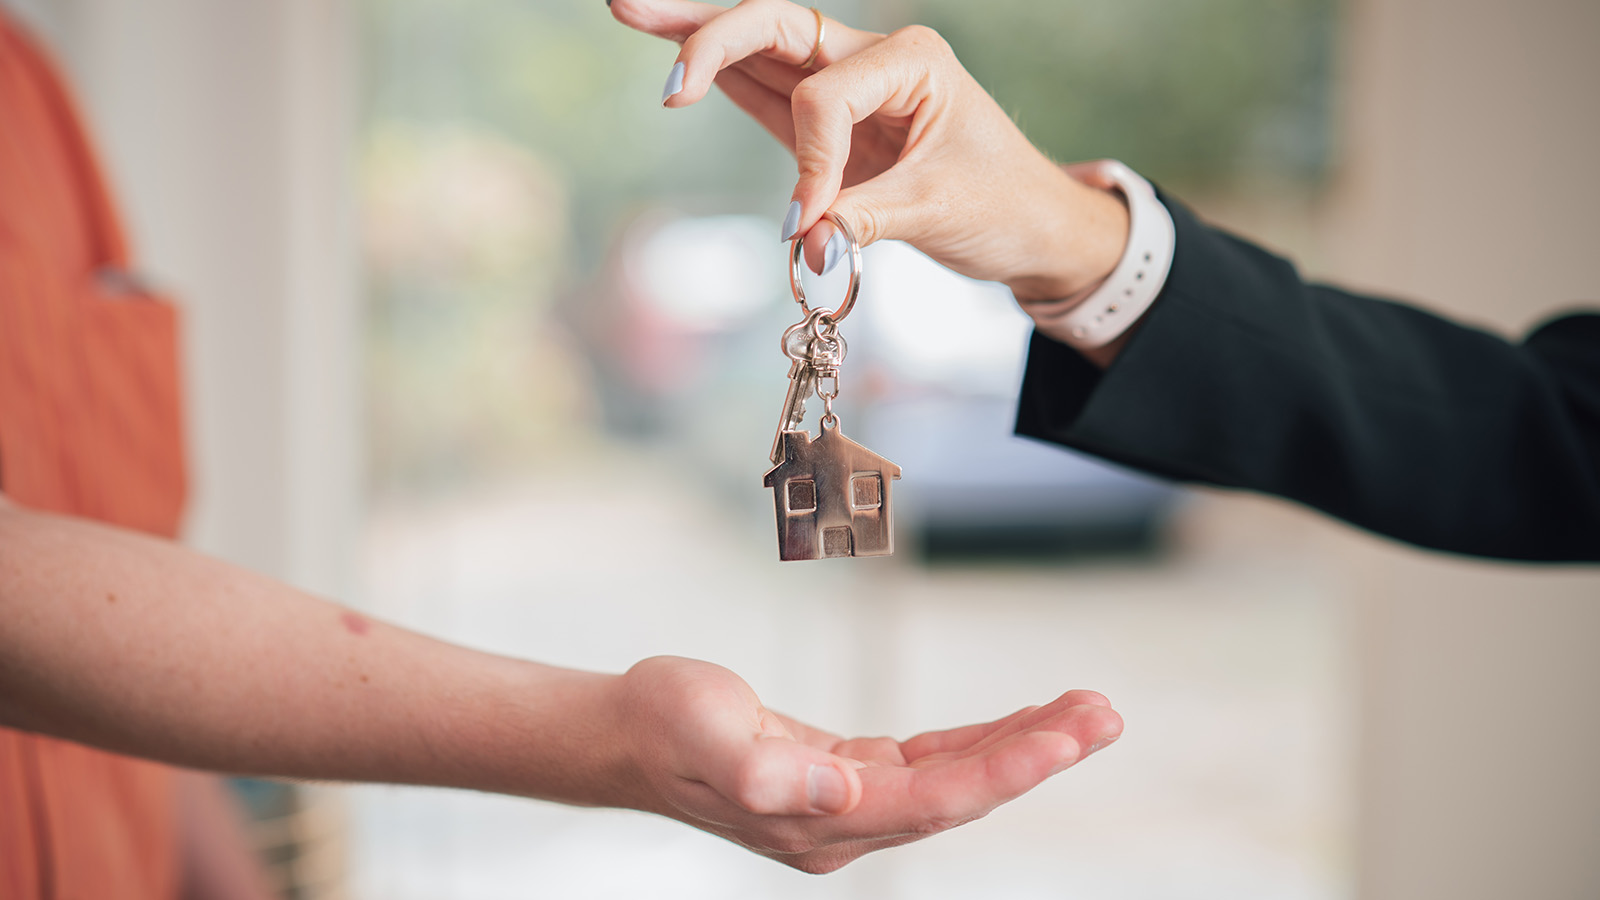 Handing over the keys to a new home